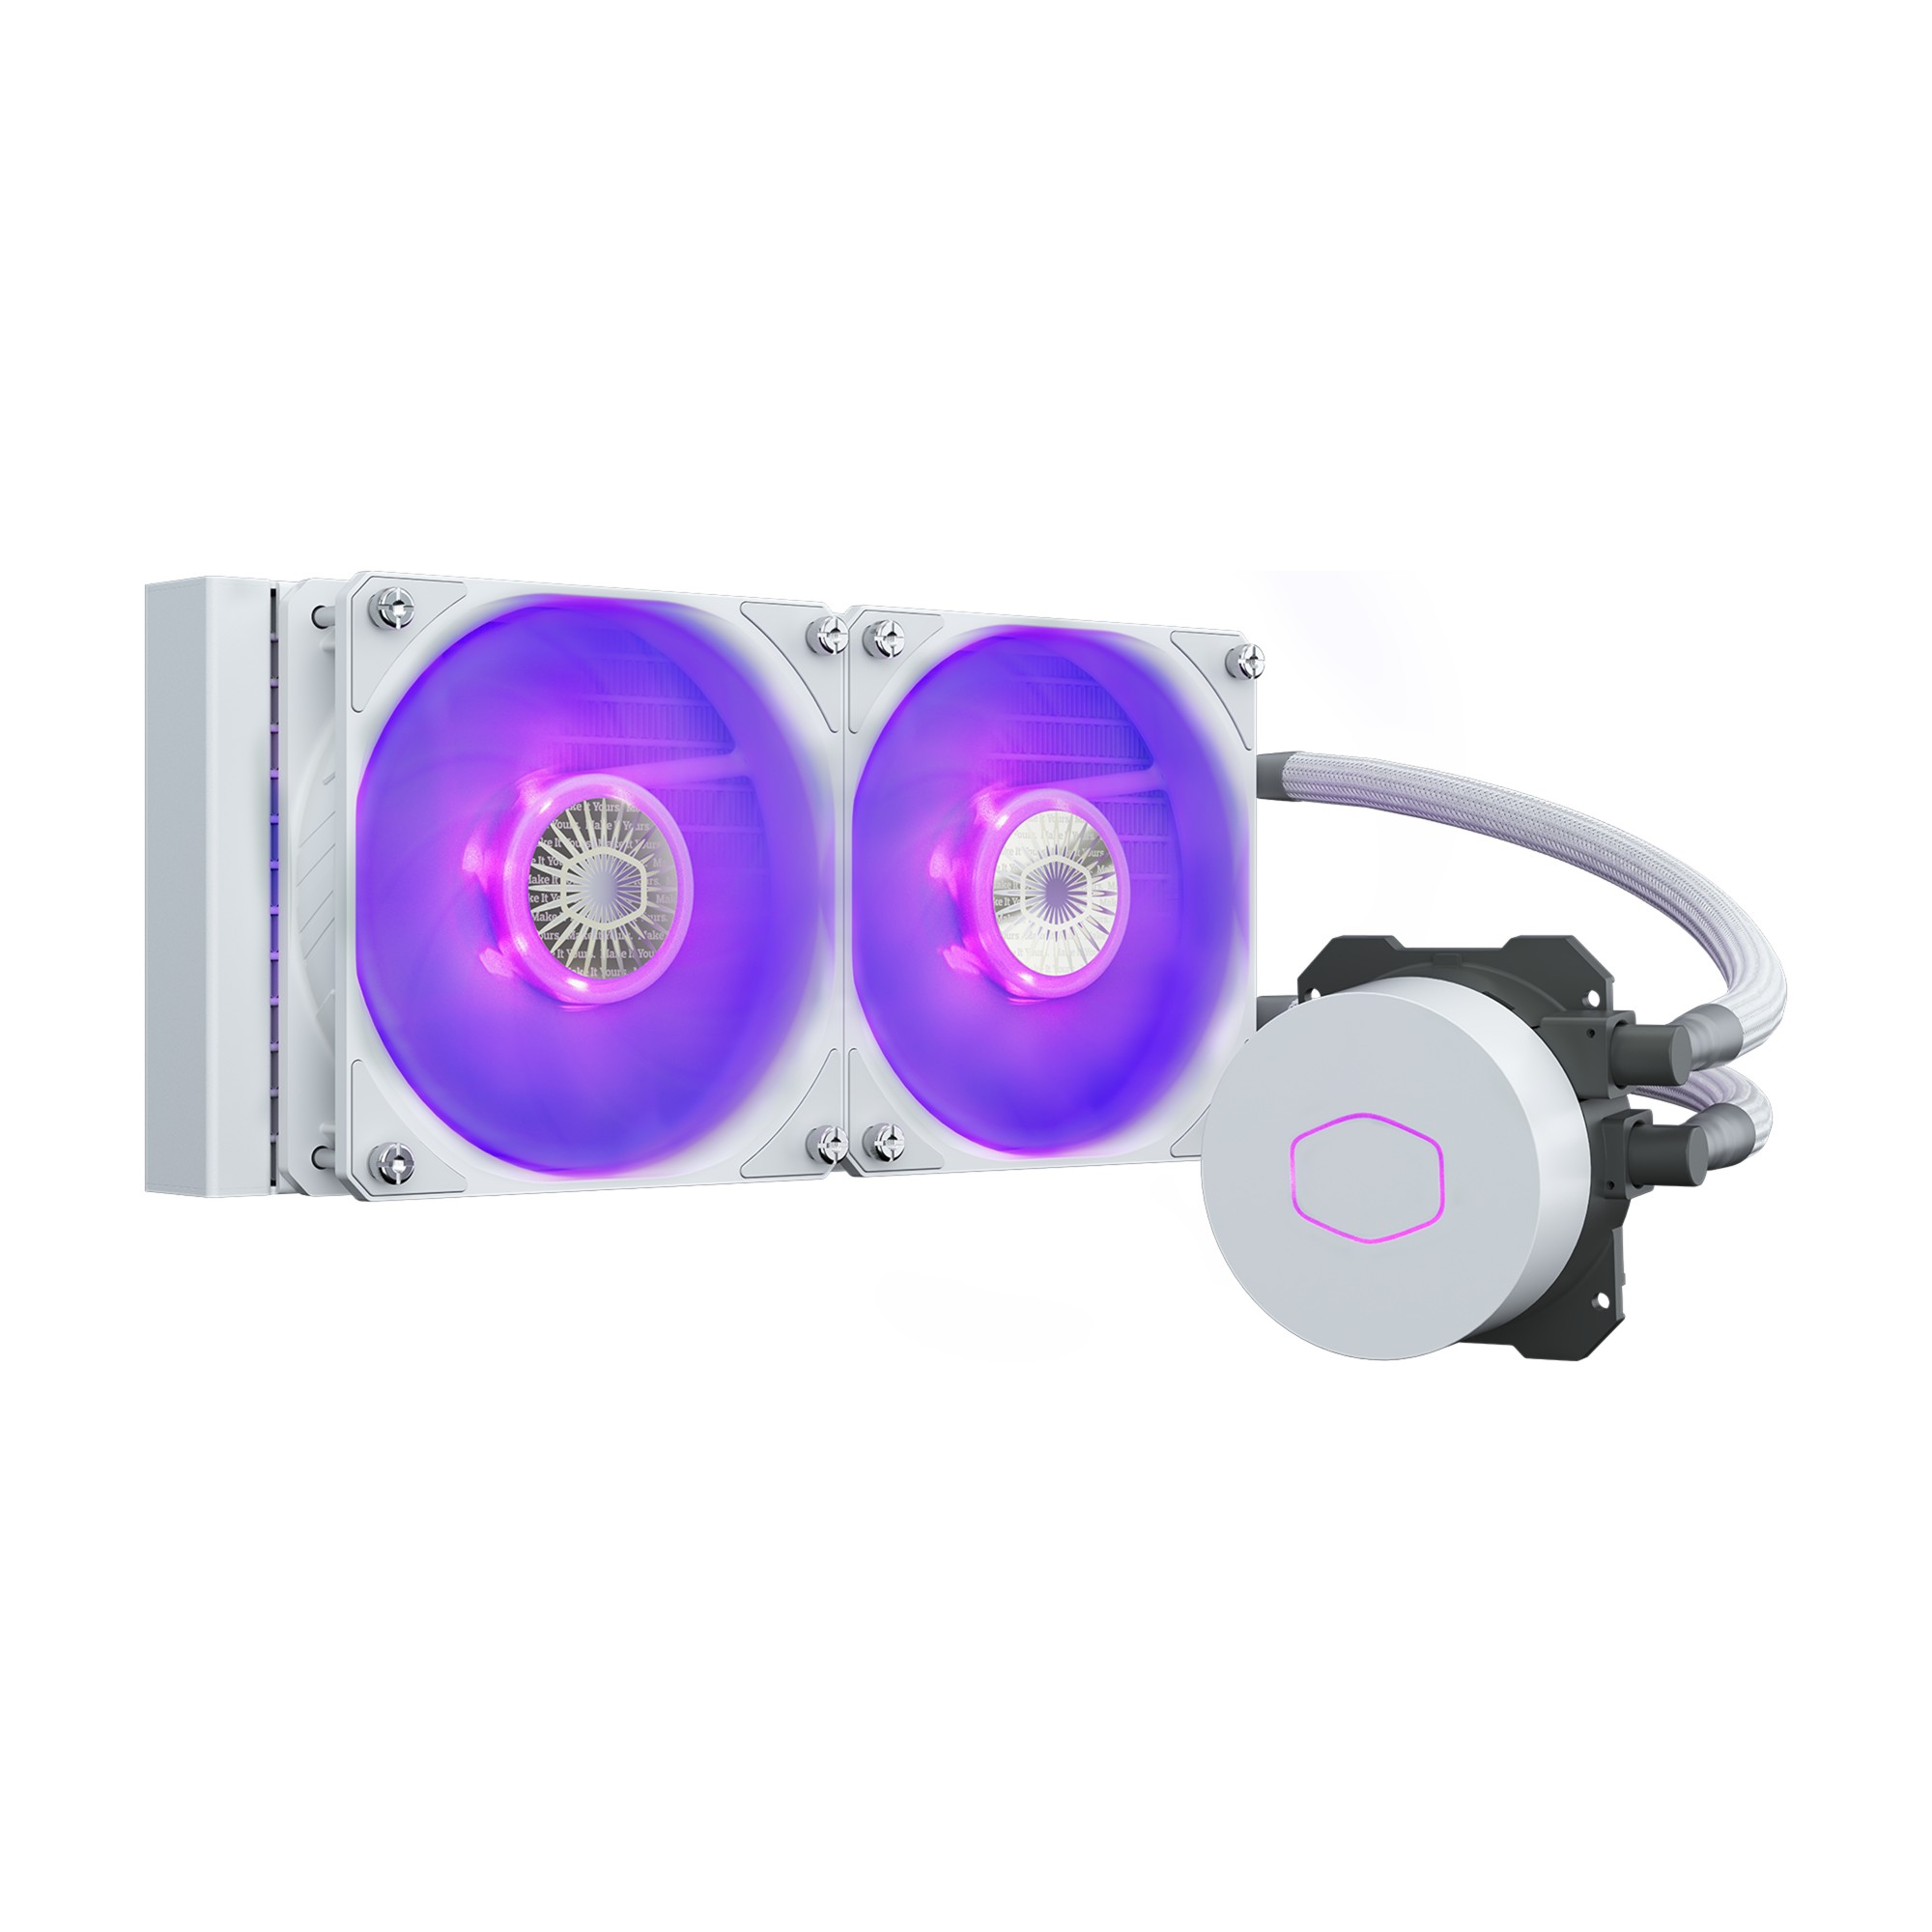 Cooler Master MasterLiquid ML240L V2 RGB White Edition Motherboard All-in-one liquid cooler 12 cm